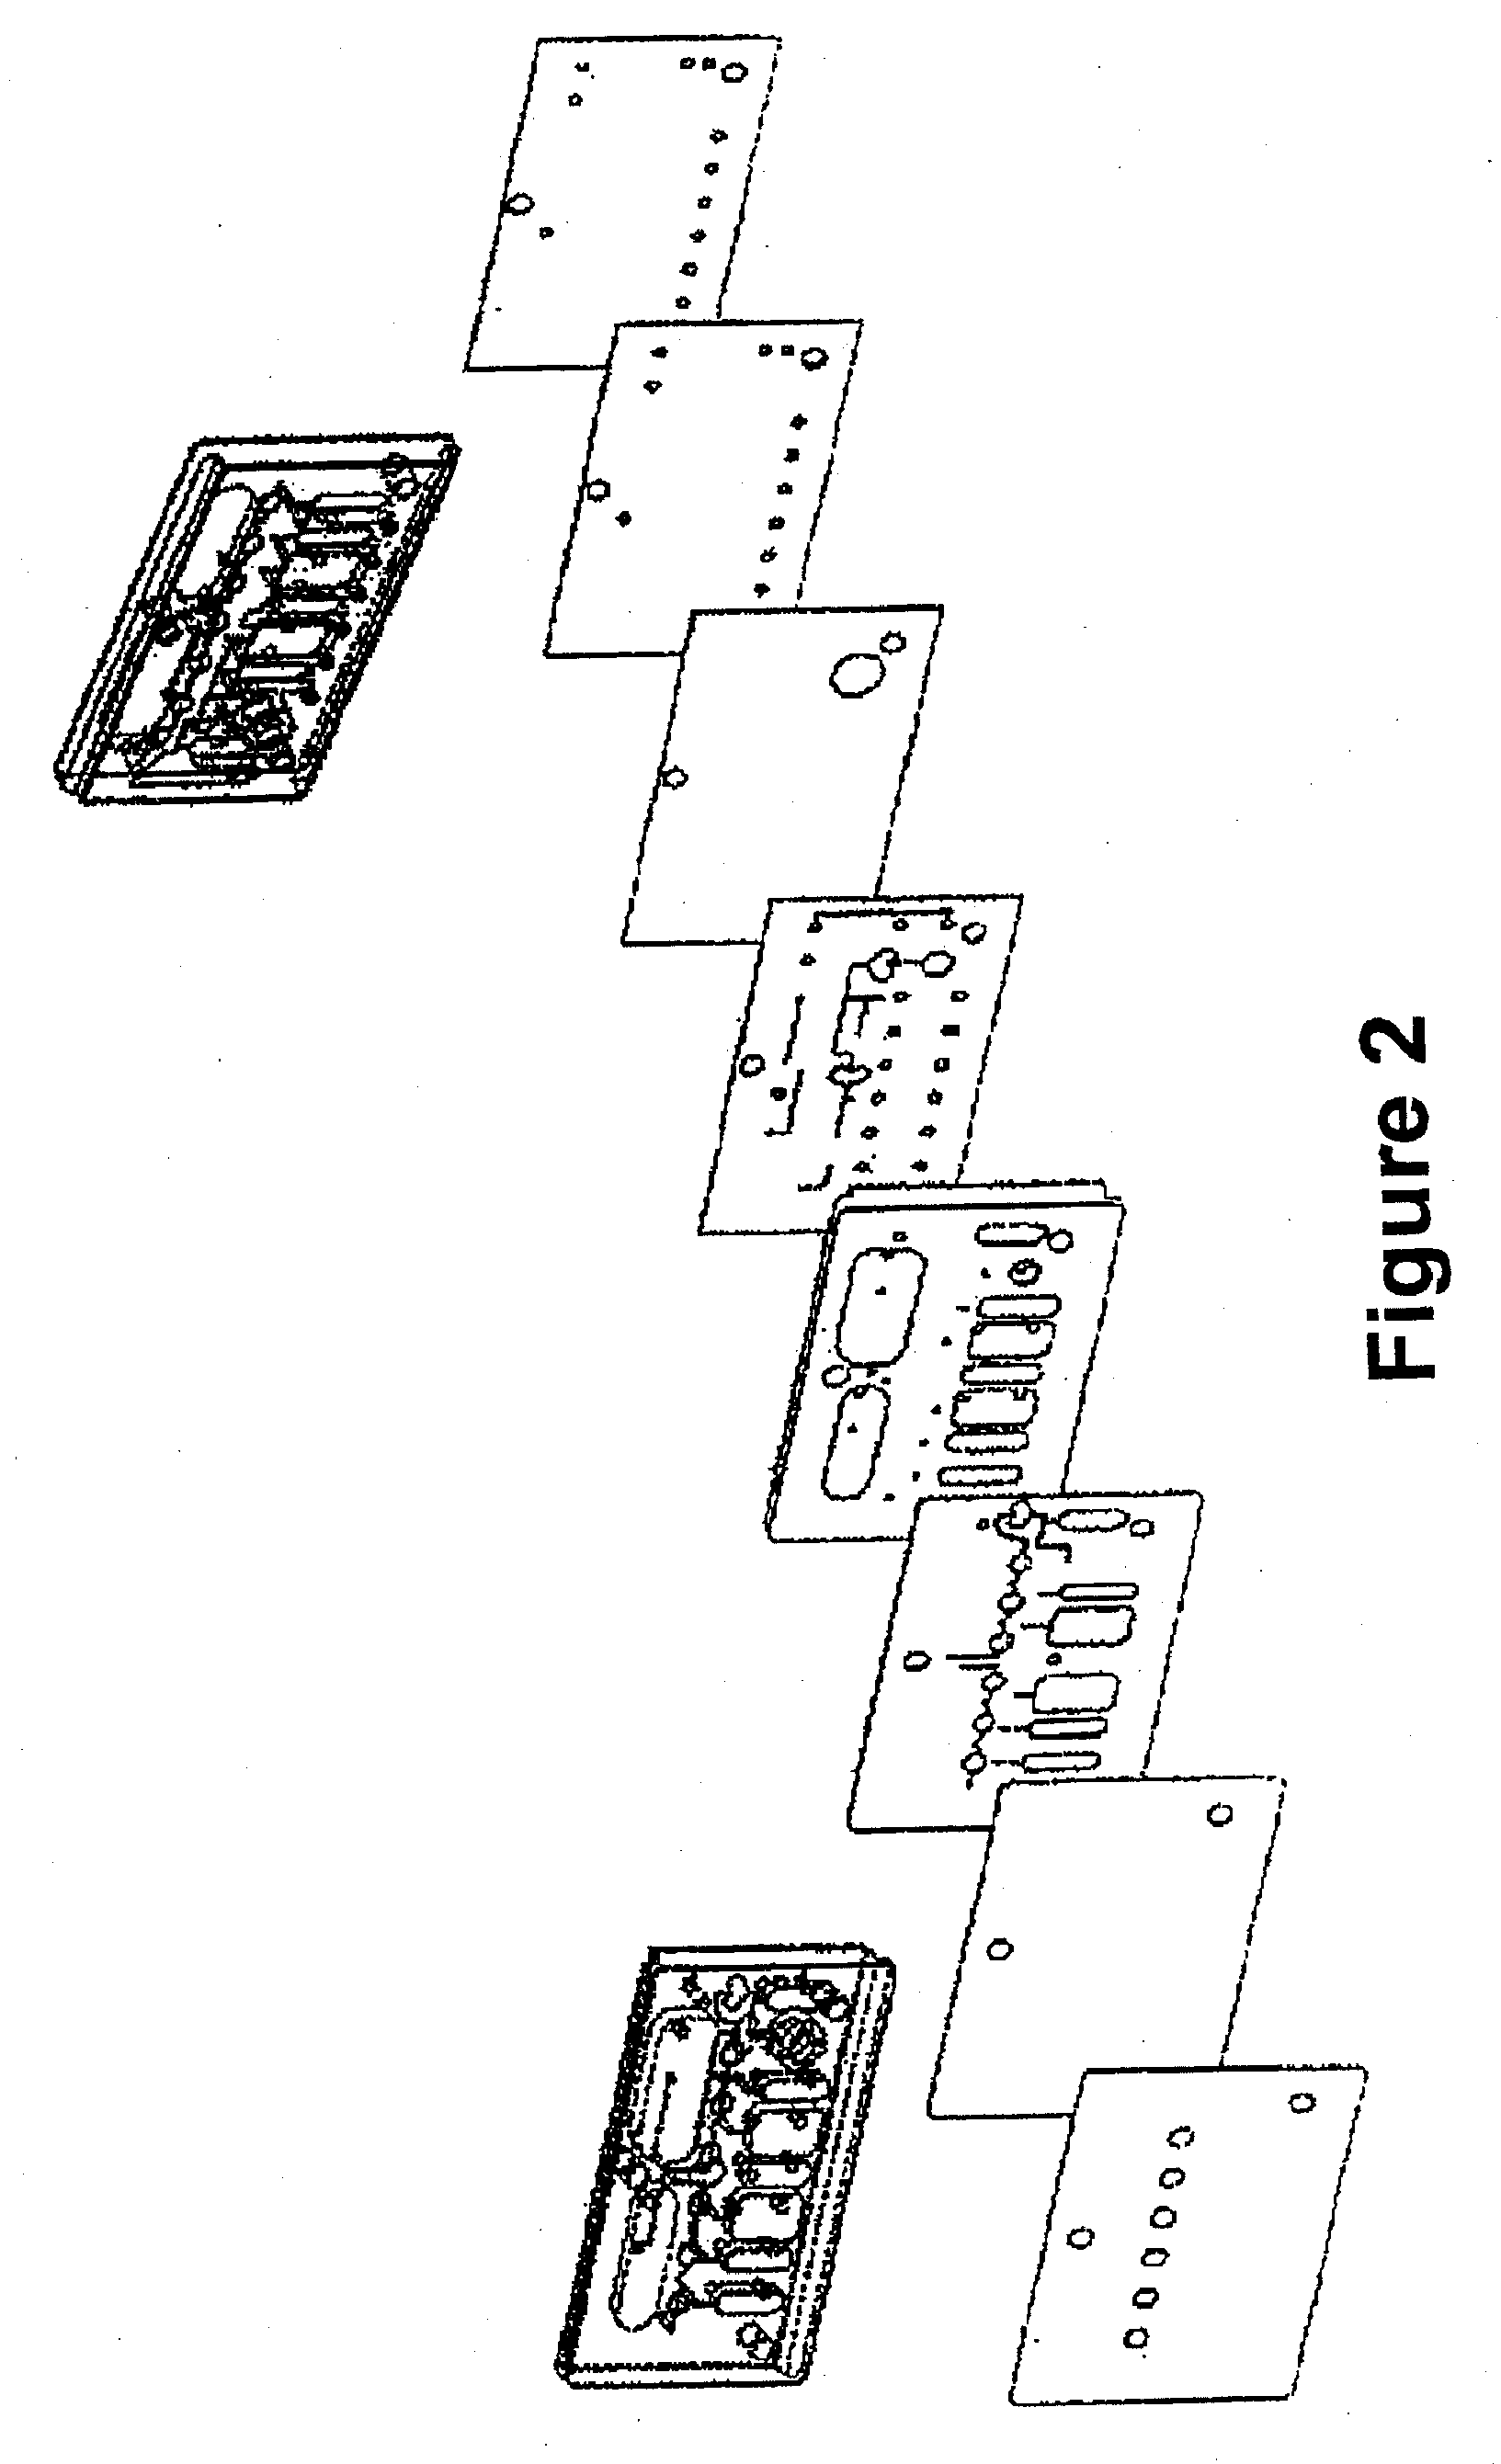 Systems and Methods of Sample Processing and Fluid Control in a Fluidic System